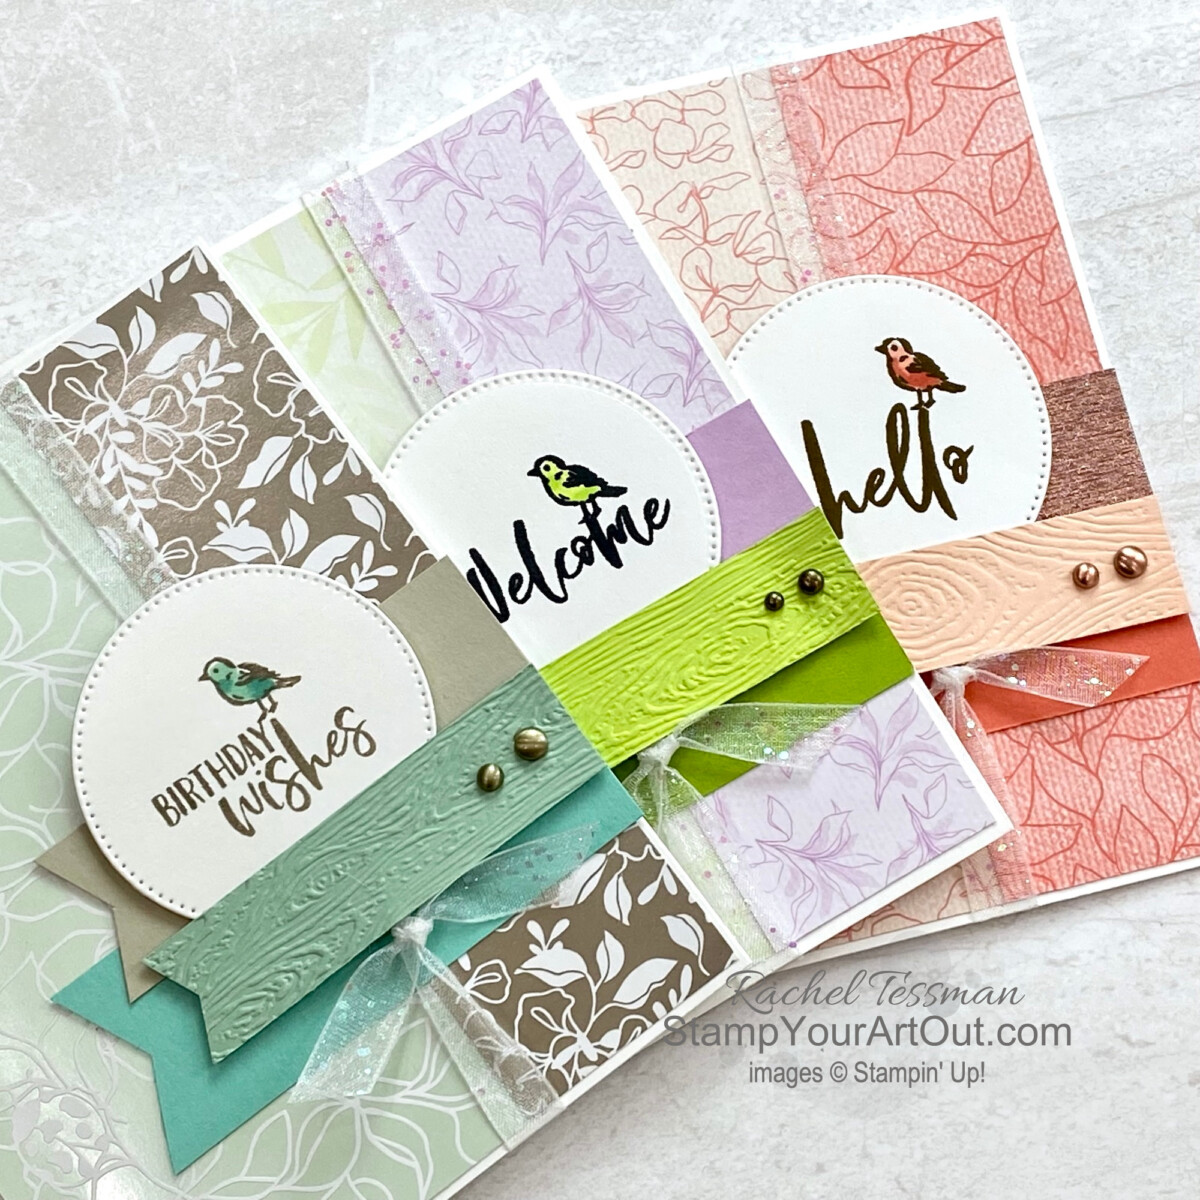 Visit my 9/14/22 blog post so you can see three cards I created using the Garden Birdhouses Stamp Set, Splendid Day Designer Paper, the Timber Embossing Folder, fun coordinating colors of cardstock & embellishments, and Stampin' Blends. I was inspired by a sketch challenge from There She Goes (TSG 222). You’ll be able to access measurements, a how-to video, other photos, and links to the products I used. - Stampin’ Up!® - Stamp Your Art Out! www.stampyourartout.com